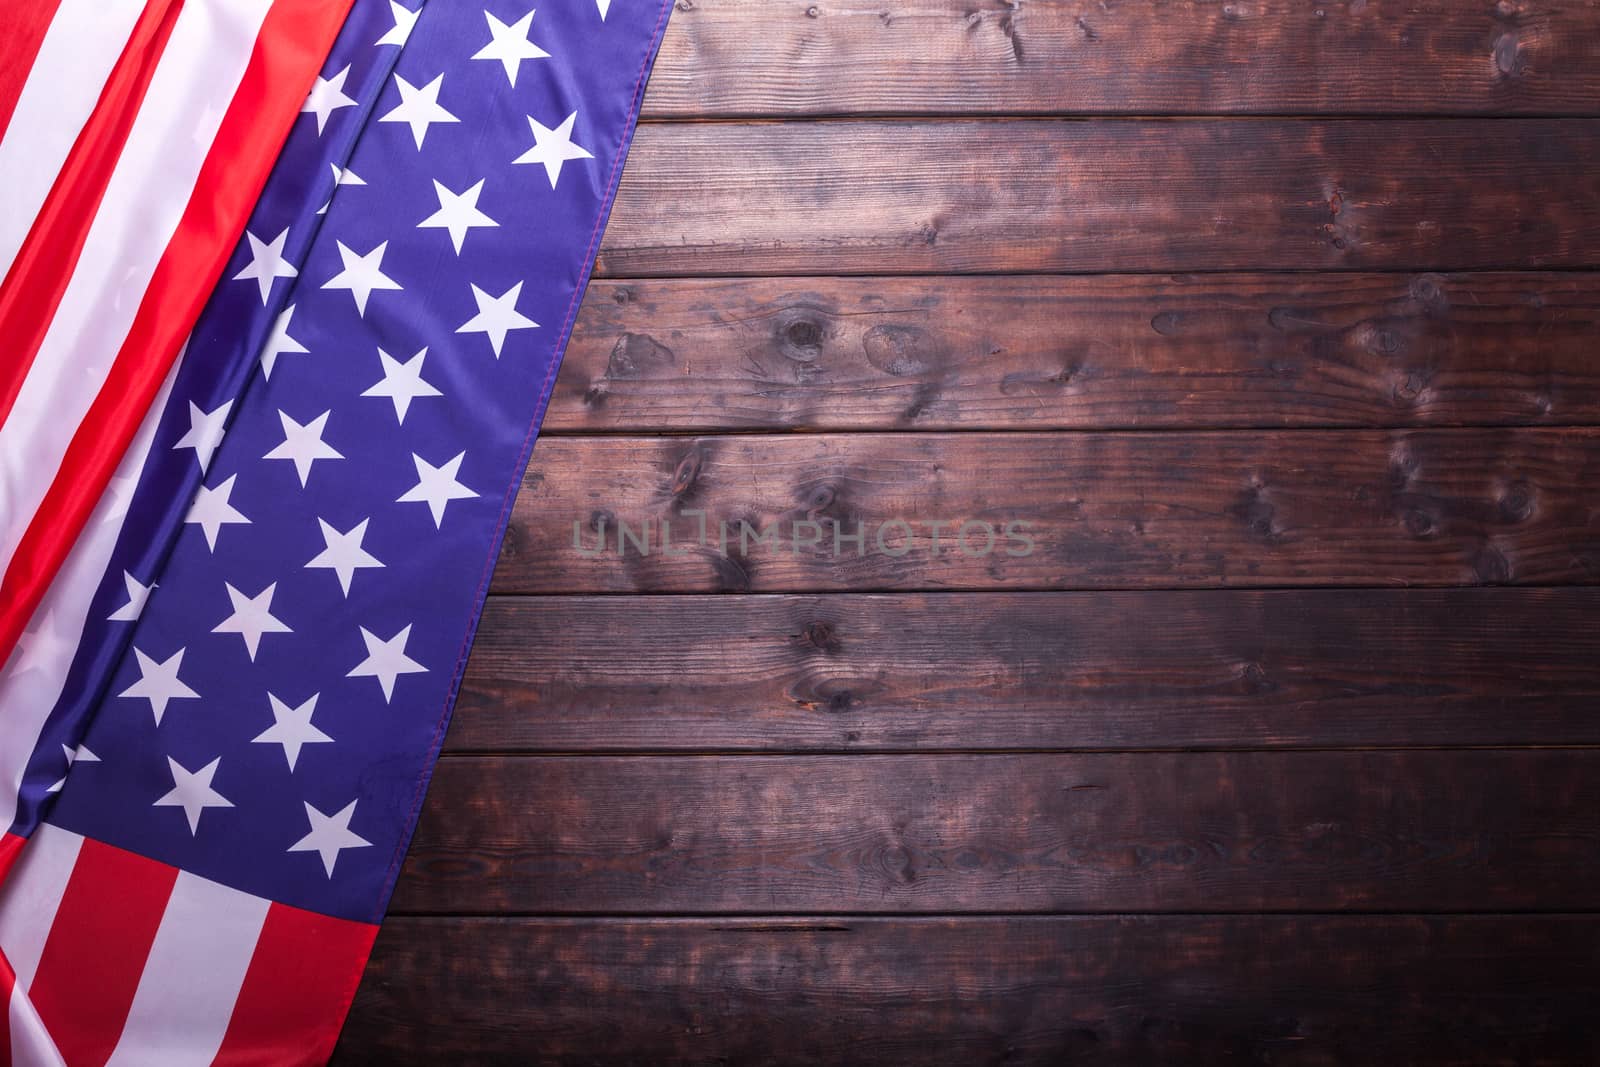 The American Flag Laying on a Wooden Background by IxMaster